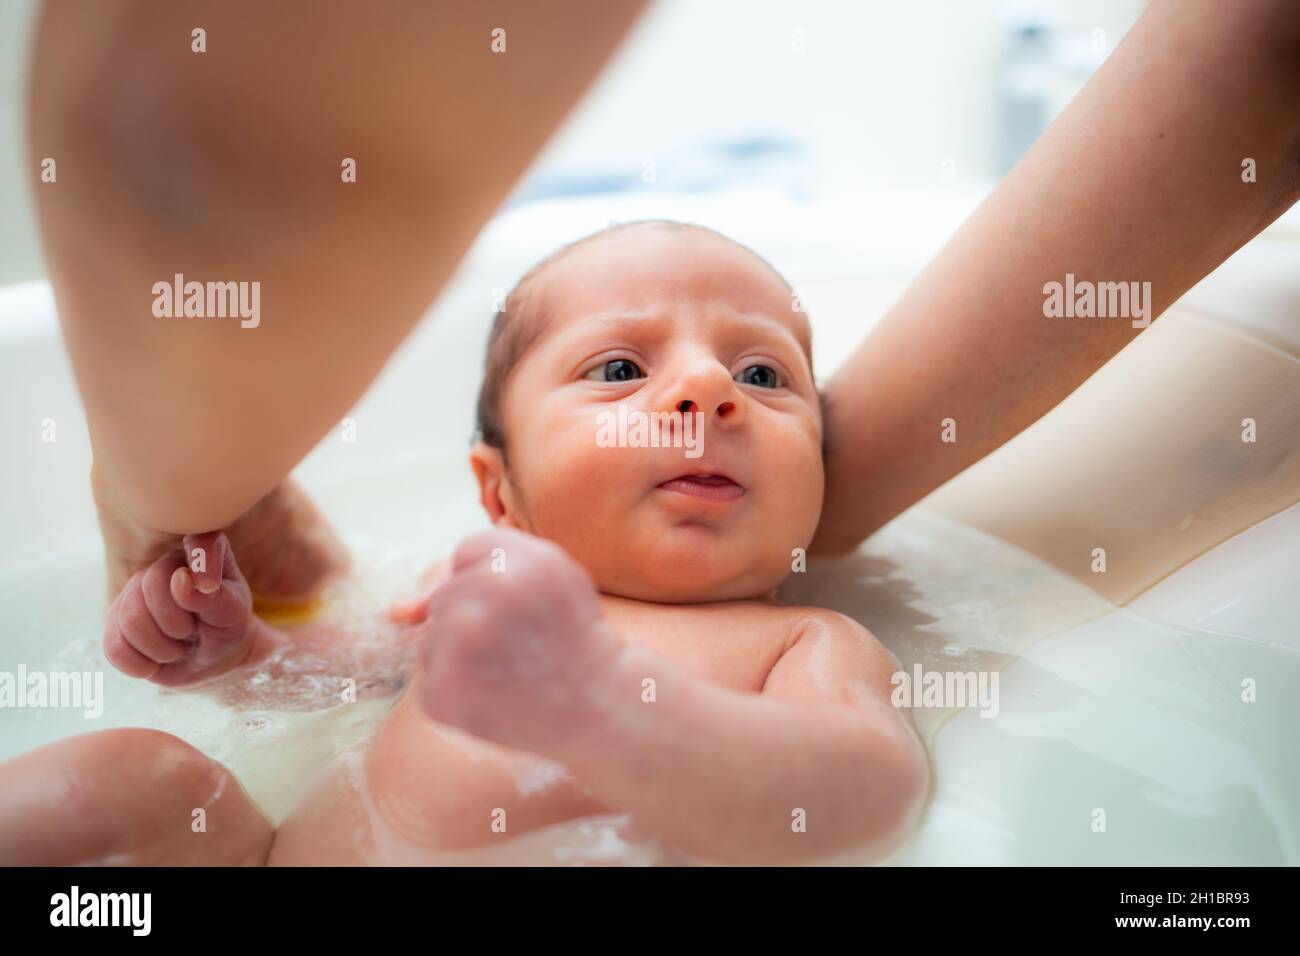 First bath of newborn baby boy. The first bath for a newborn is always a special moment. Stock Photo